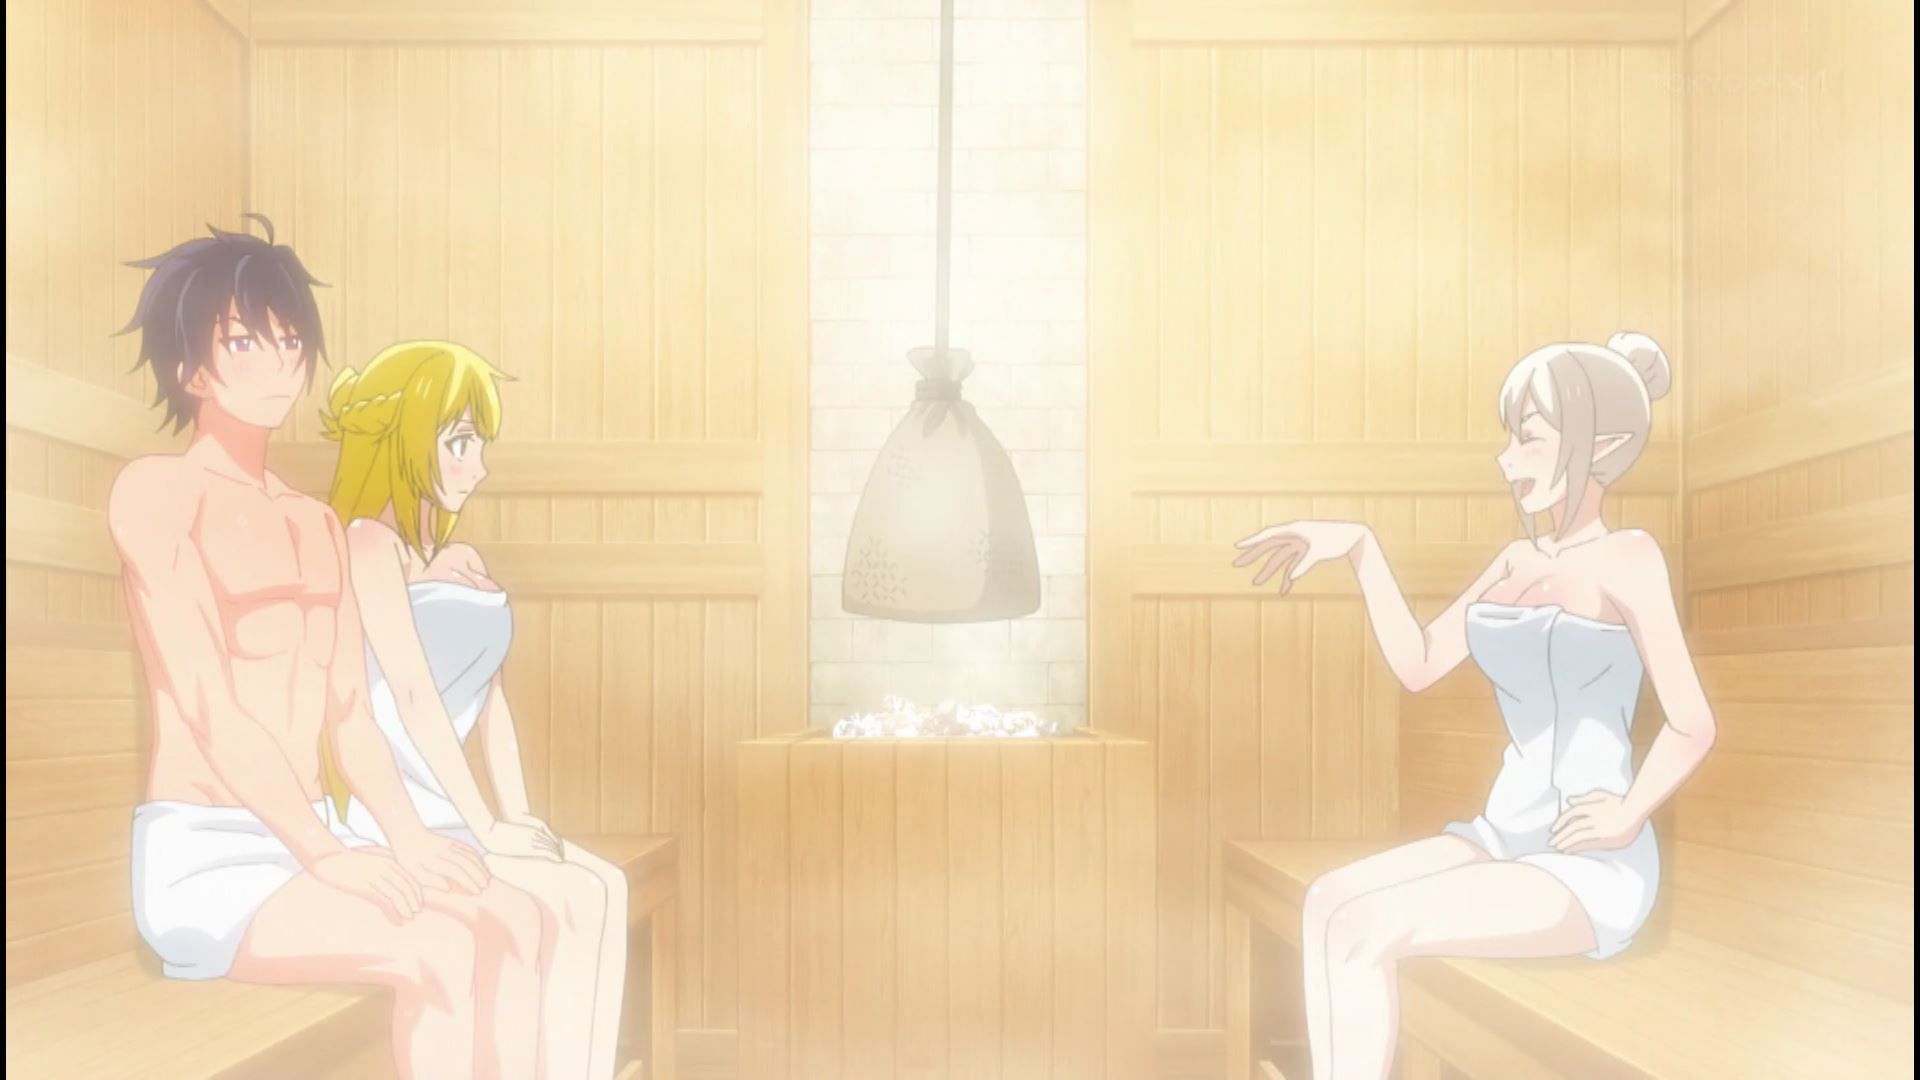 In episode 4 of the anime "True Companion", there is an erotic scene where you enter the sauna naked with an erotic boob girl! 19